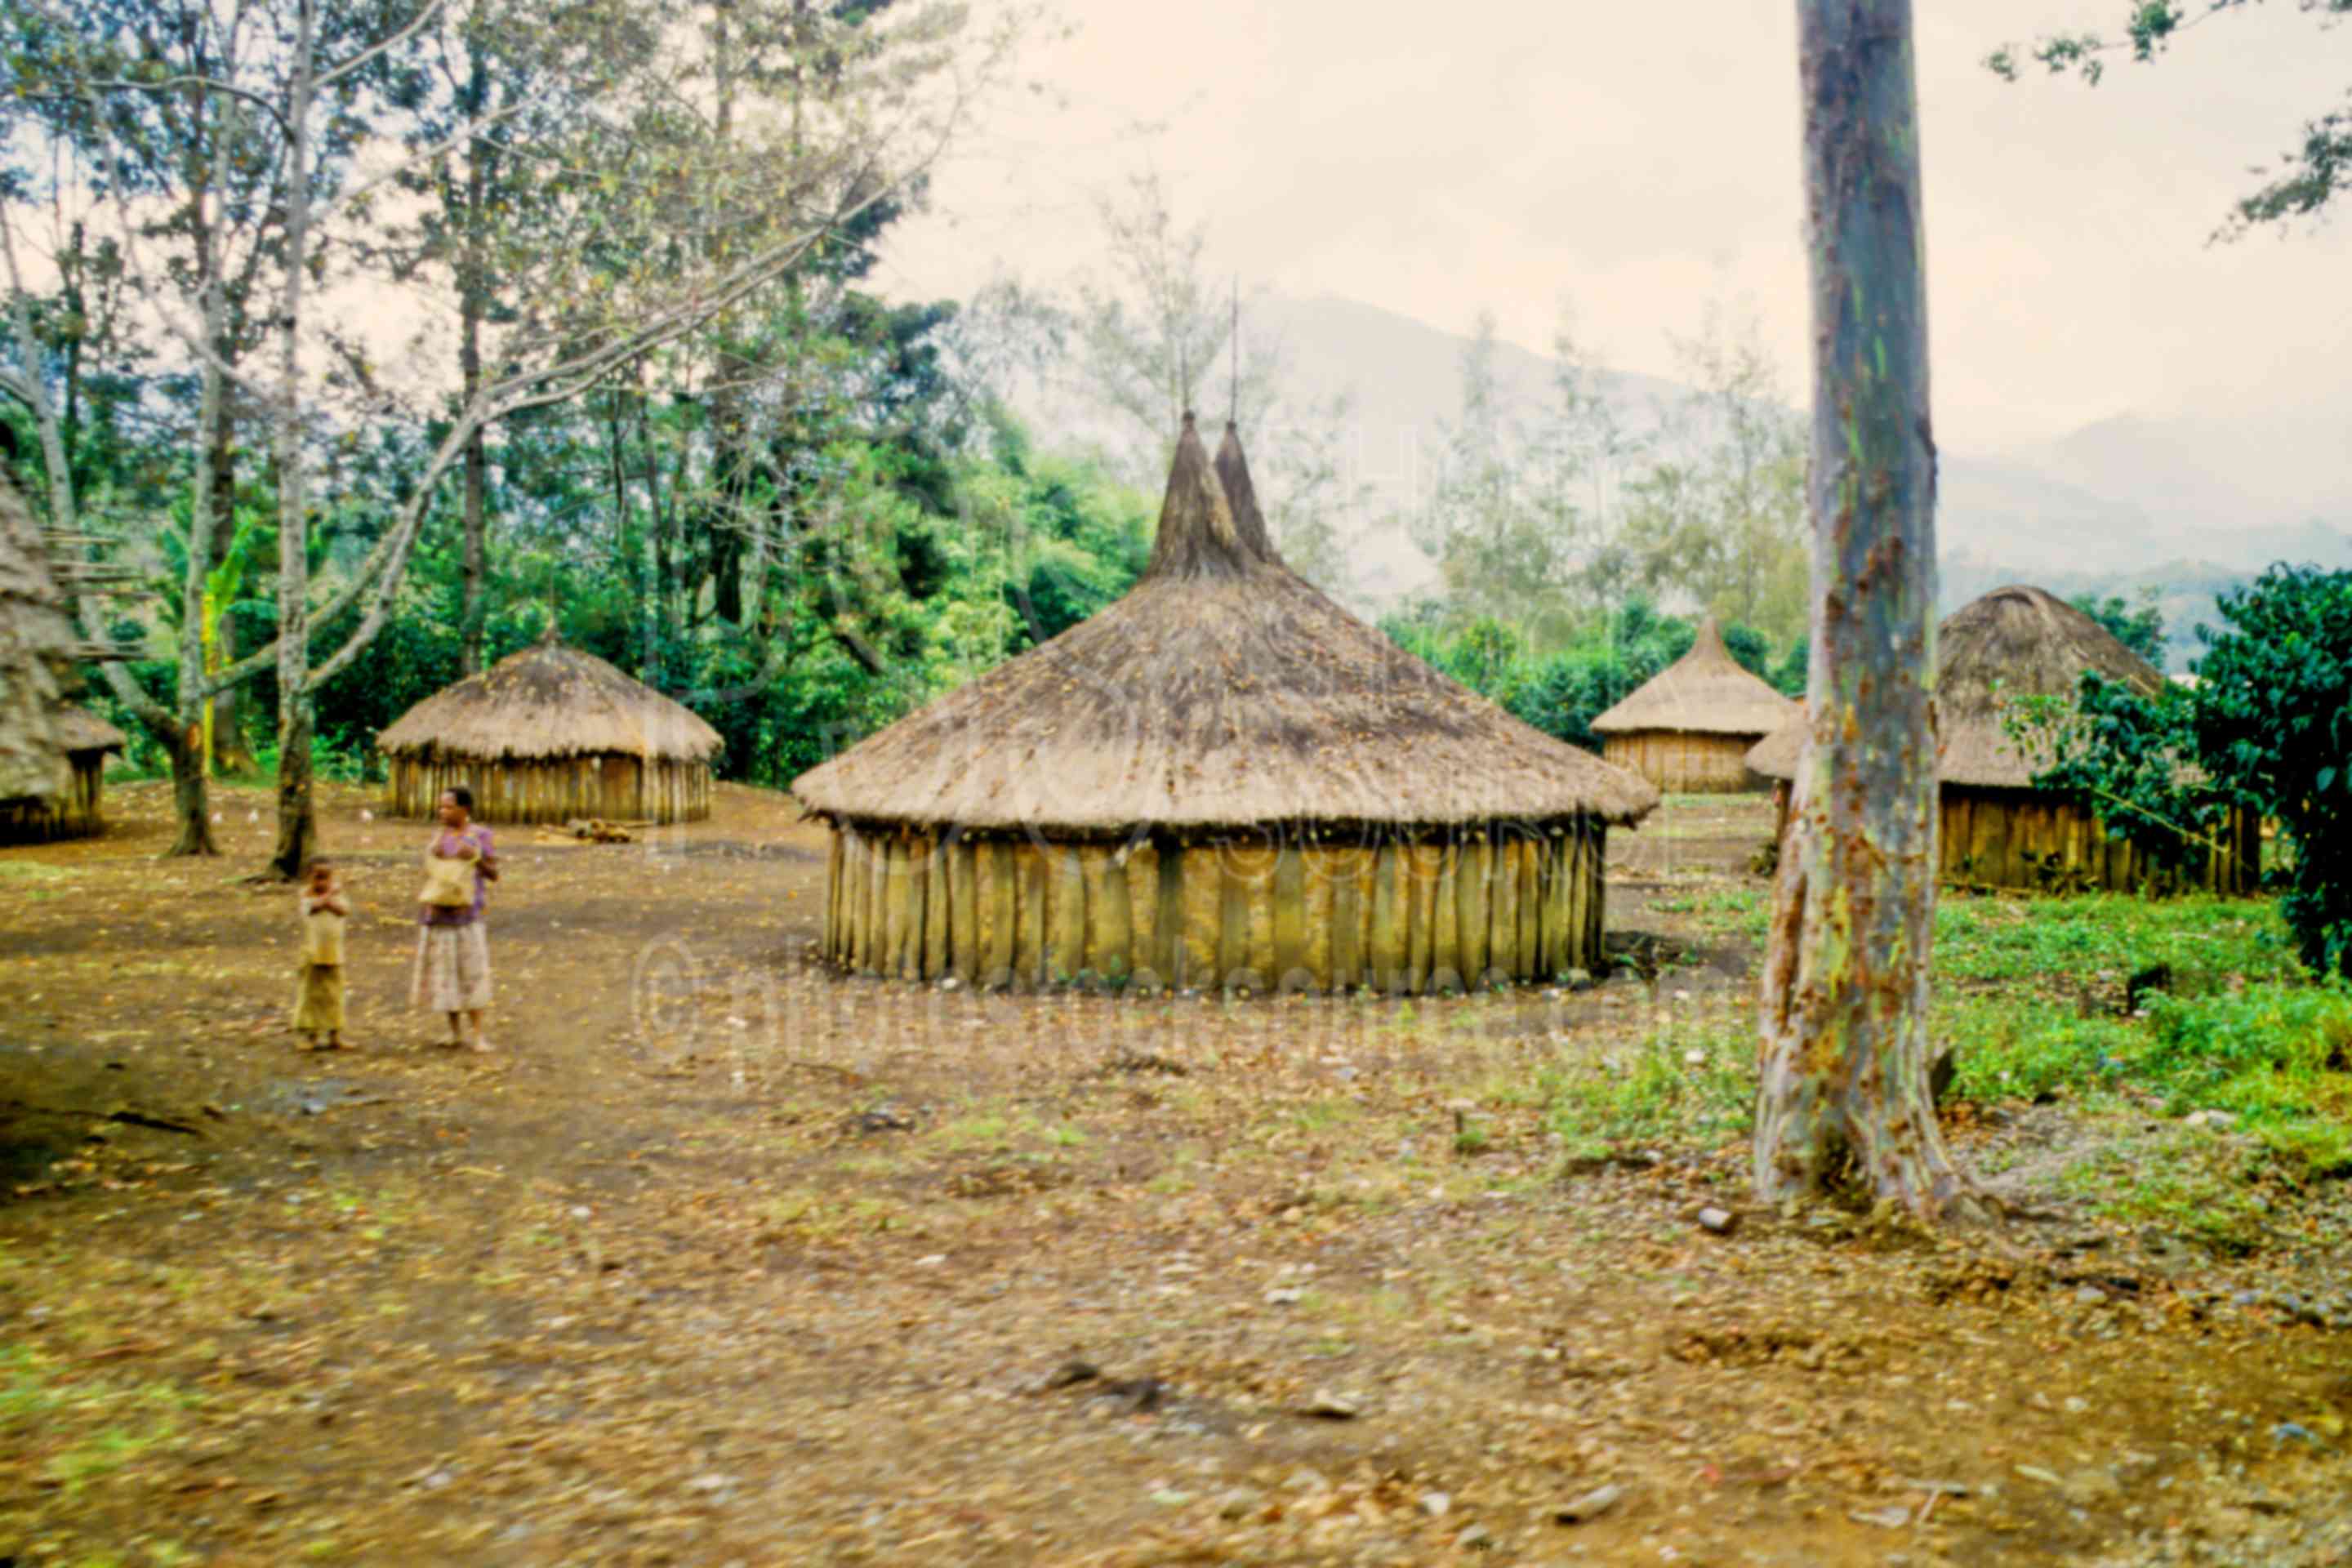 Round Huts,huts,home,house,villages